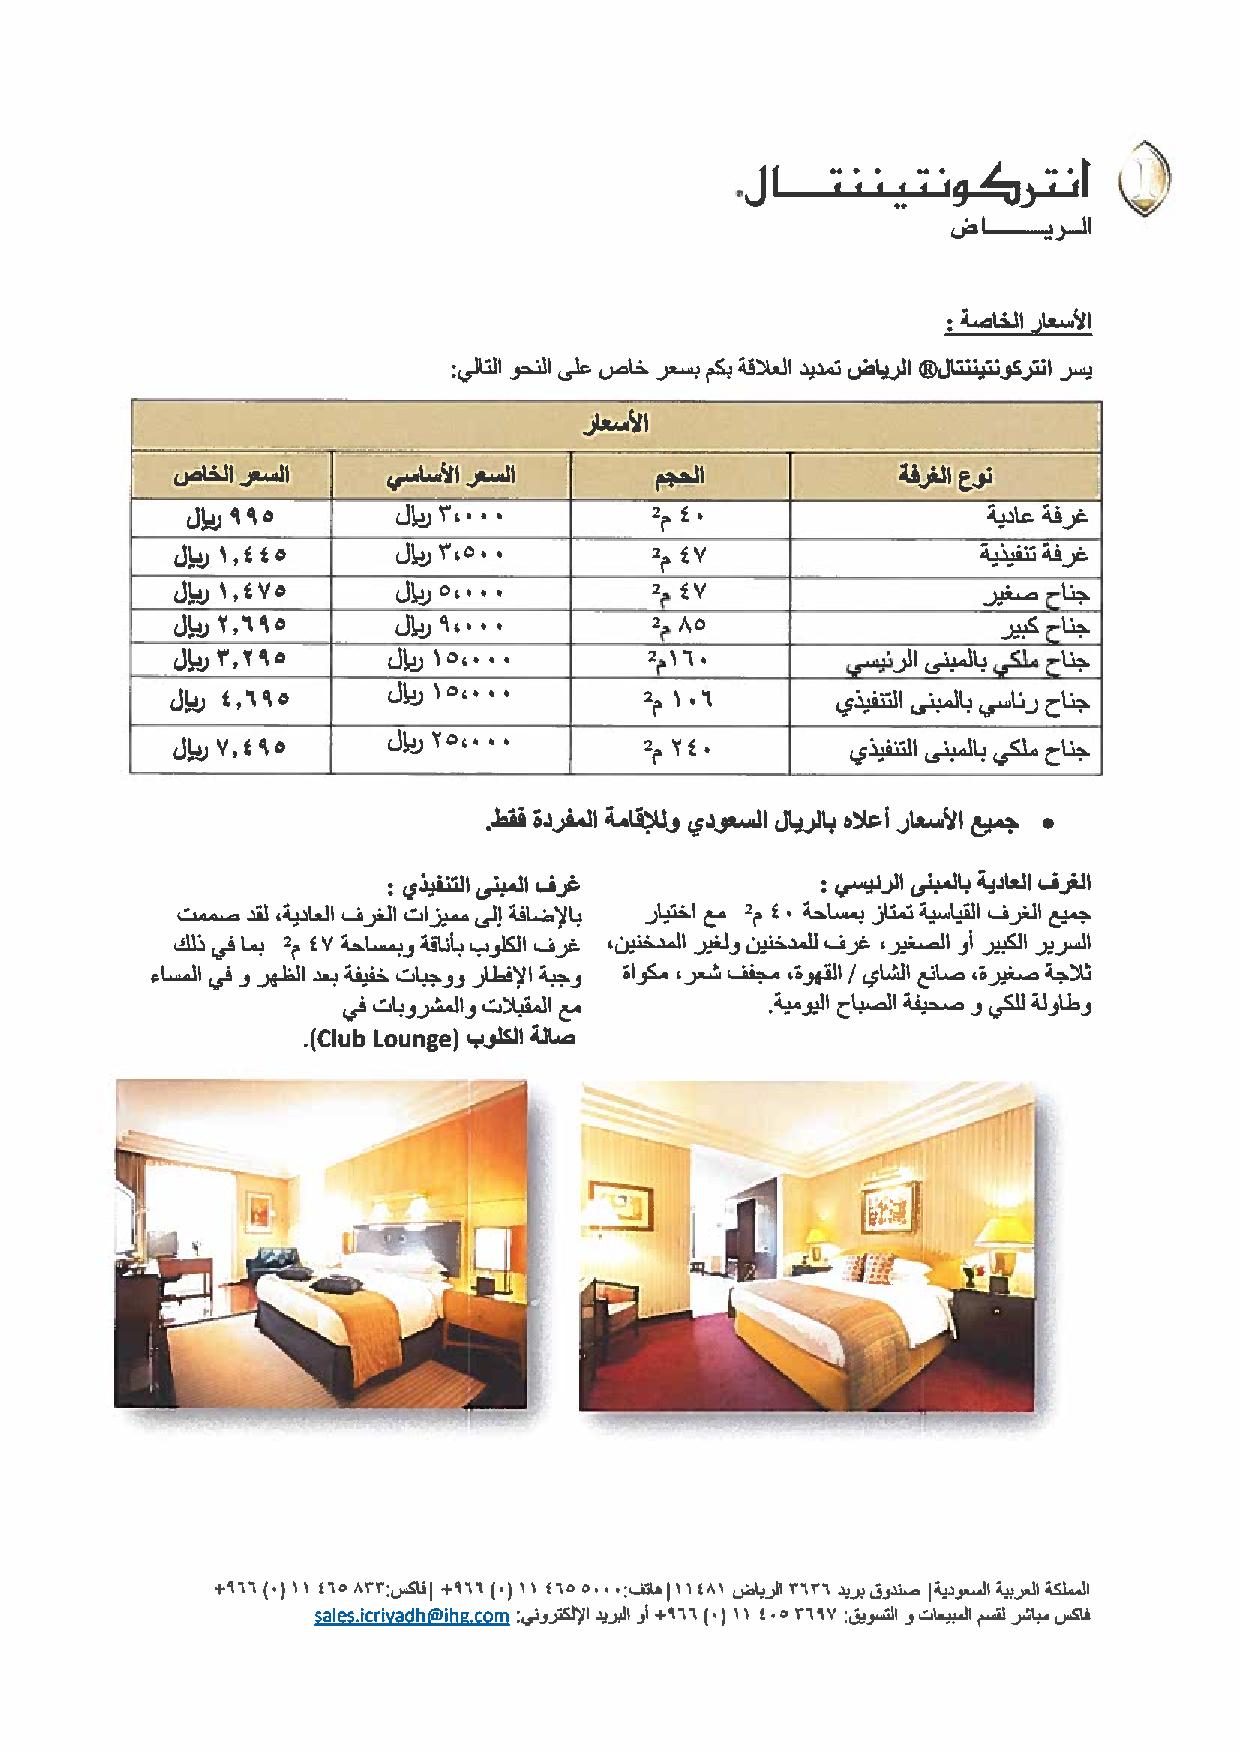 offers - king fahd university of petroleum and minerals